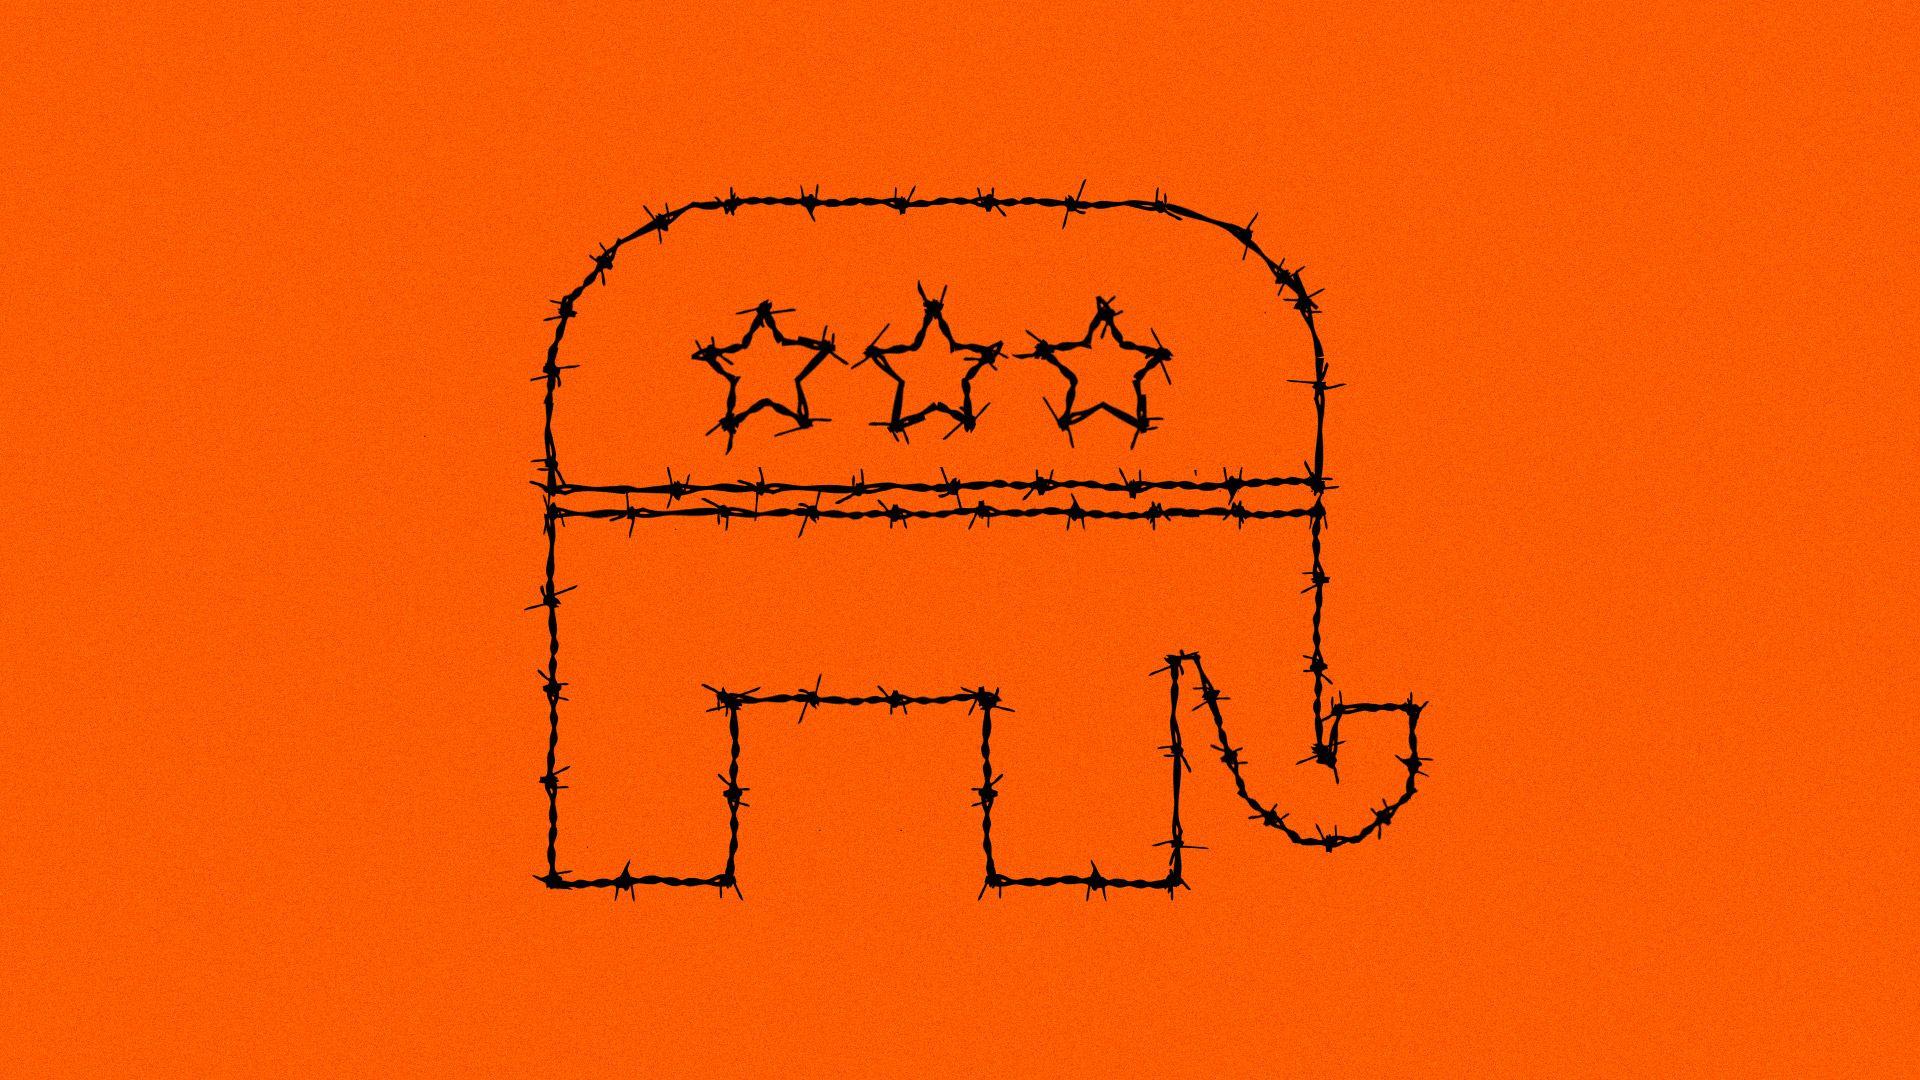 An illustration of a Republican elephant made out of barbed wire